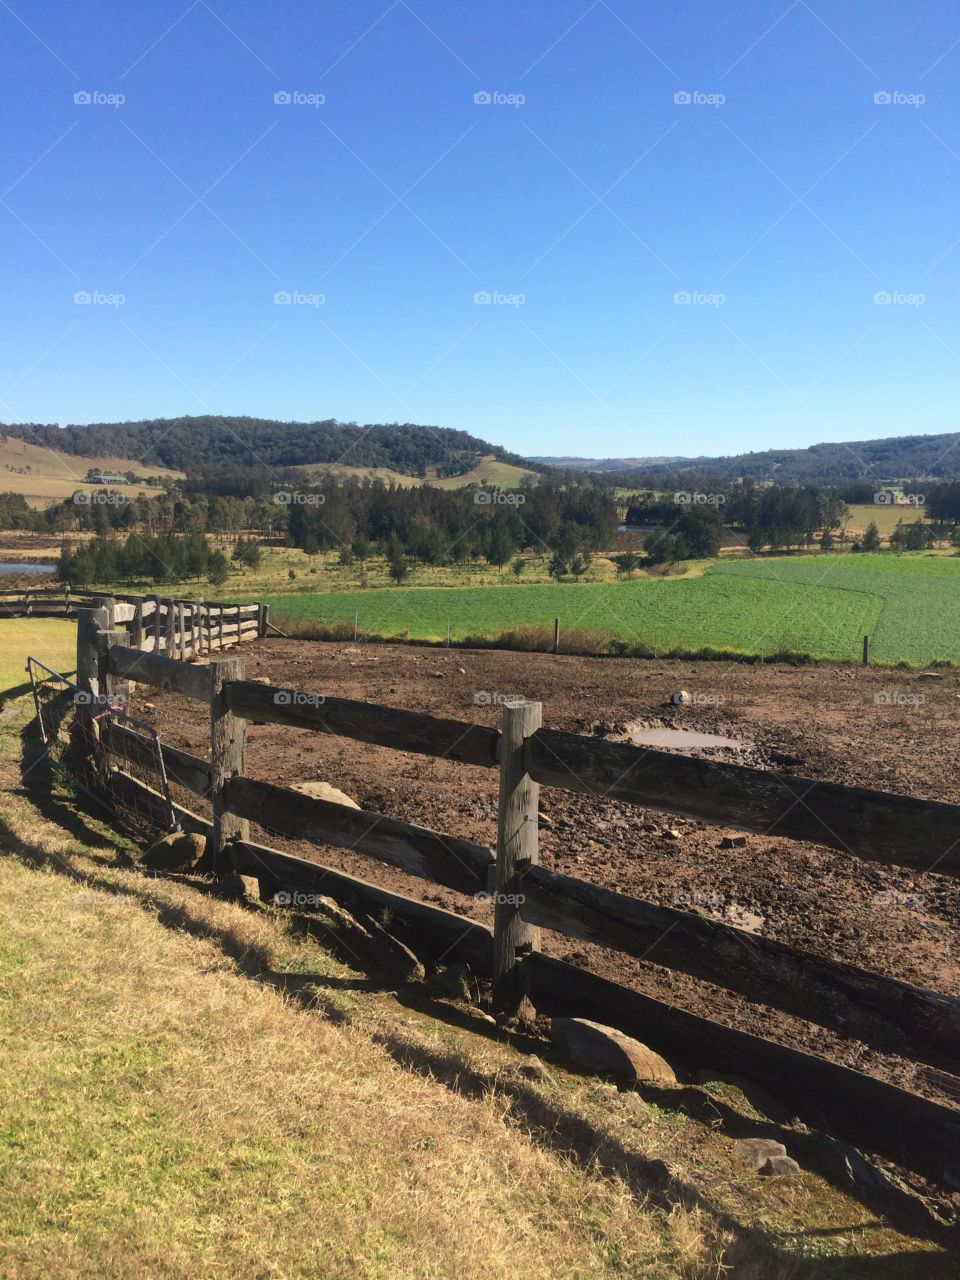 Timber fence surrounding animal enclosure on rural property